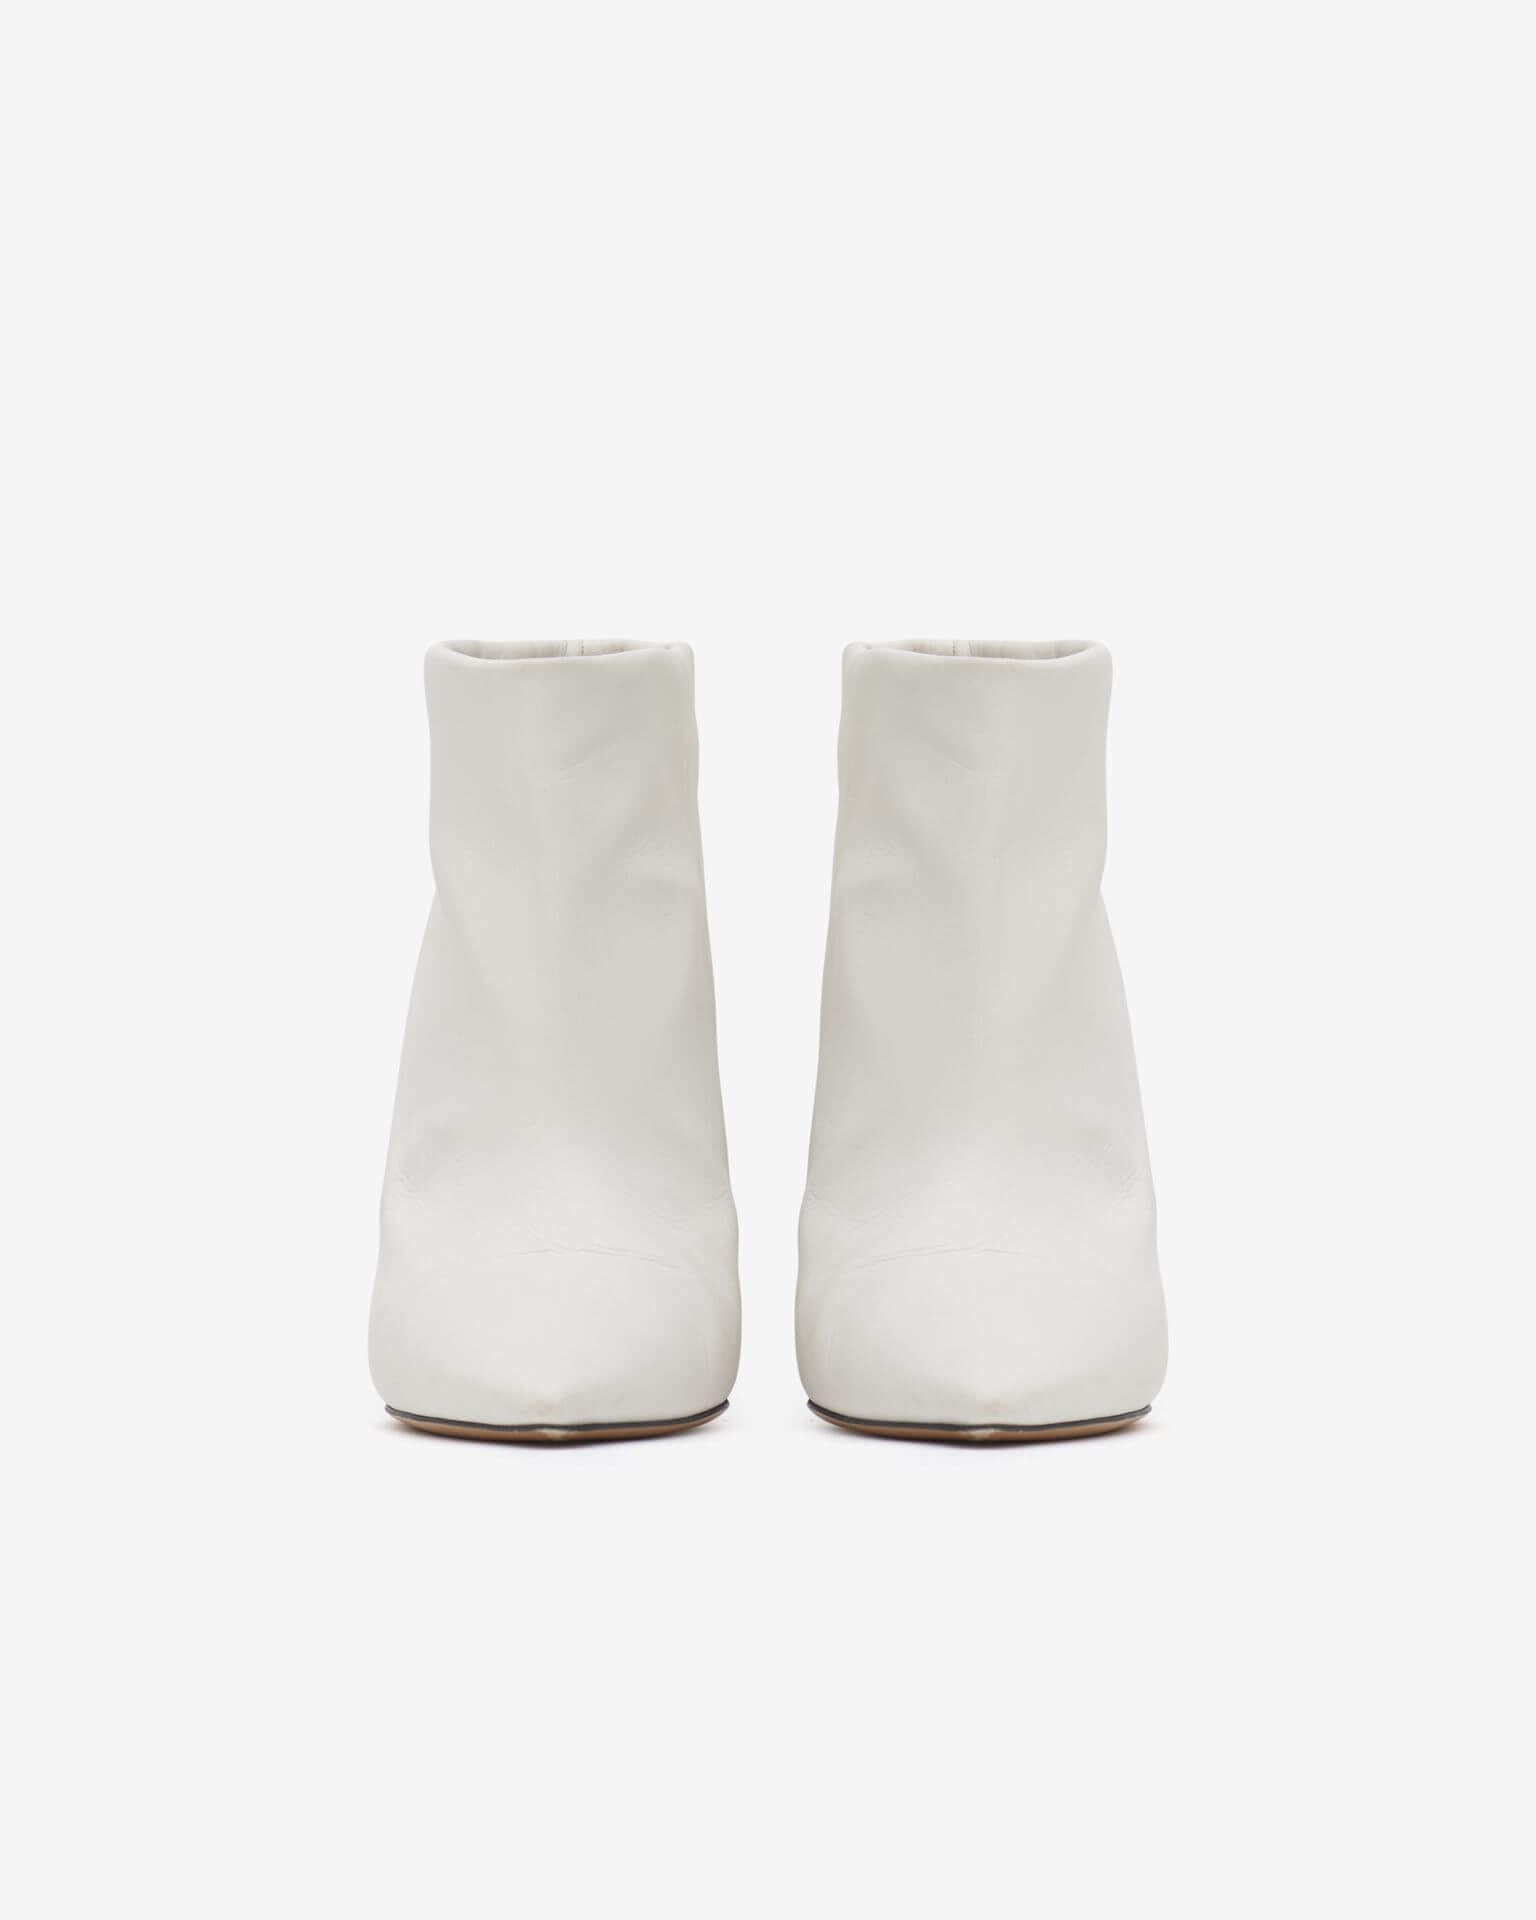 Isabel Marant Dylvee Boots in Optic White from The New Trend